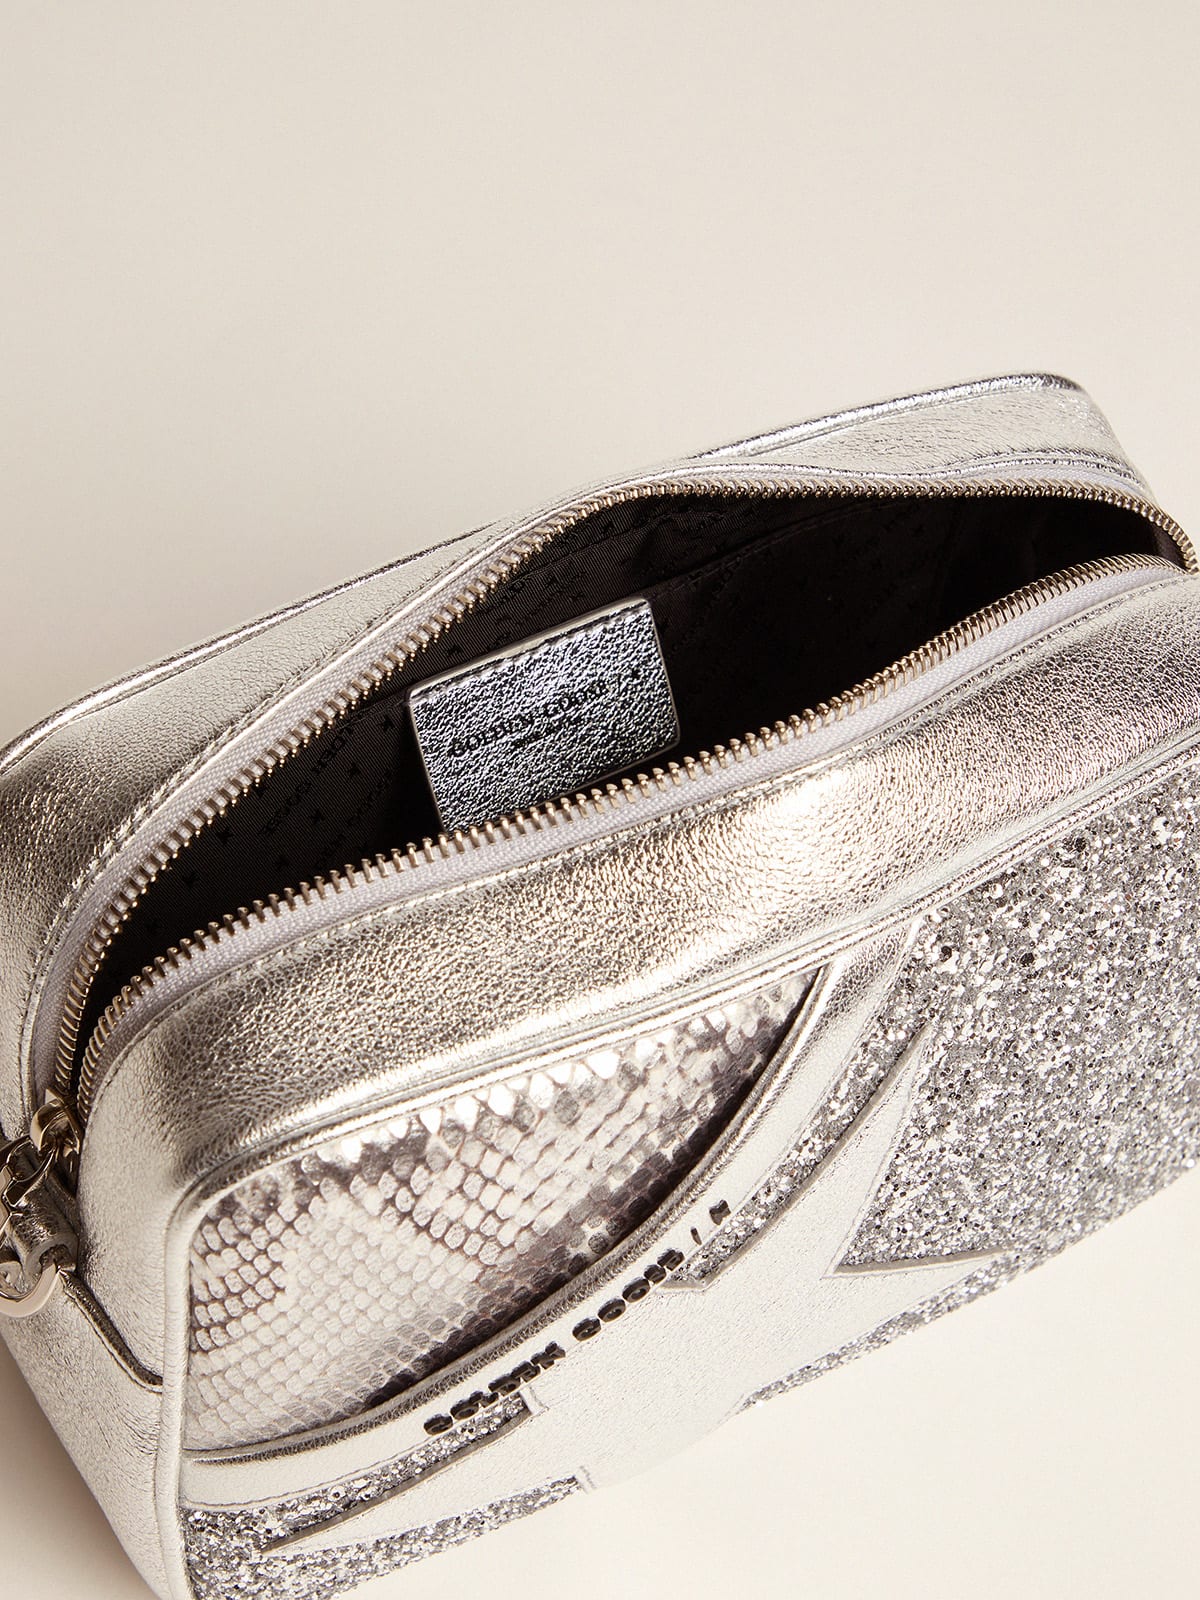 Golden Goose - Star Bag made of silver snake-print leather and glitter in 